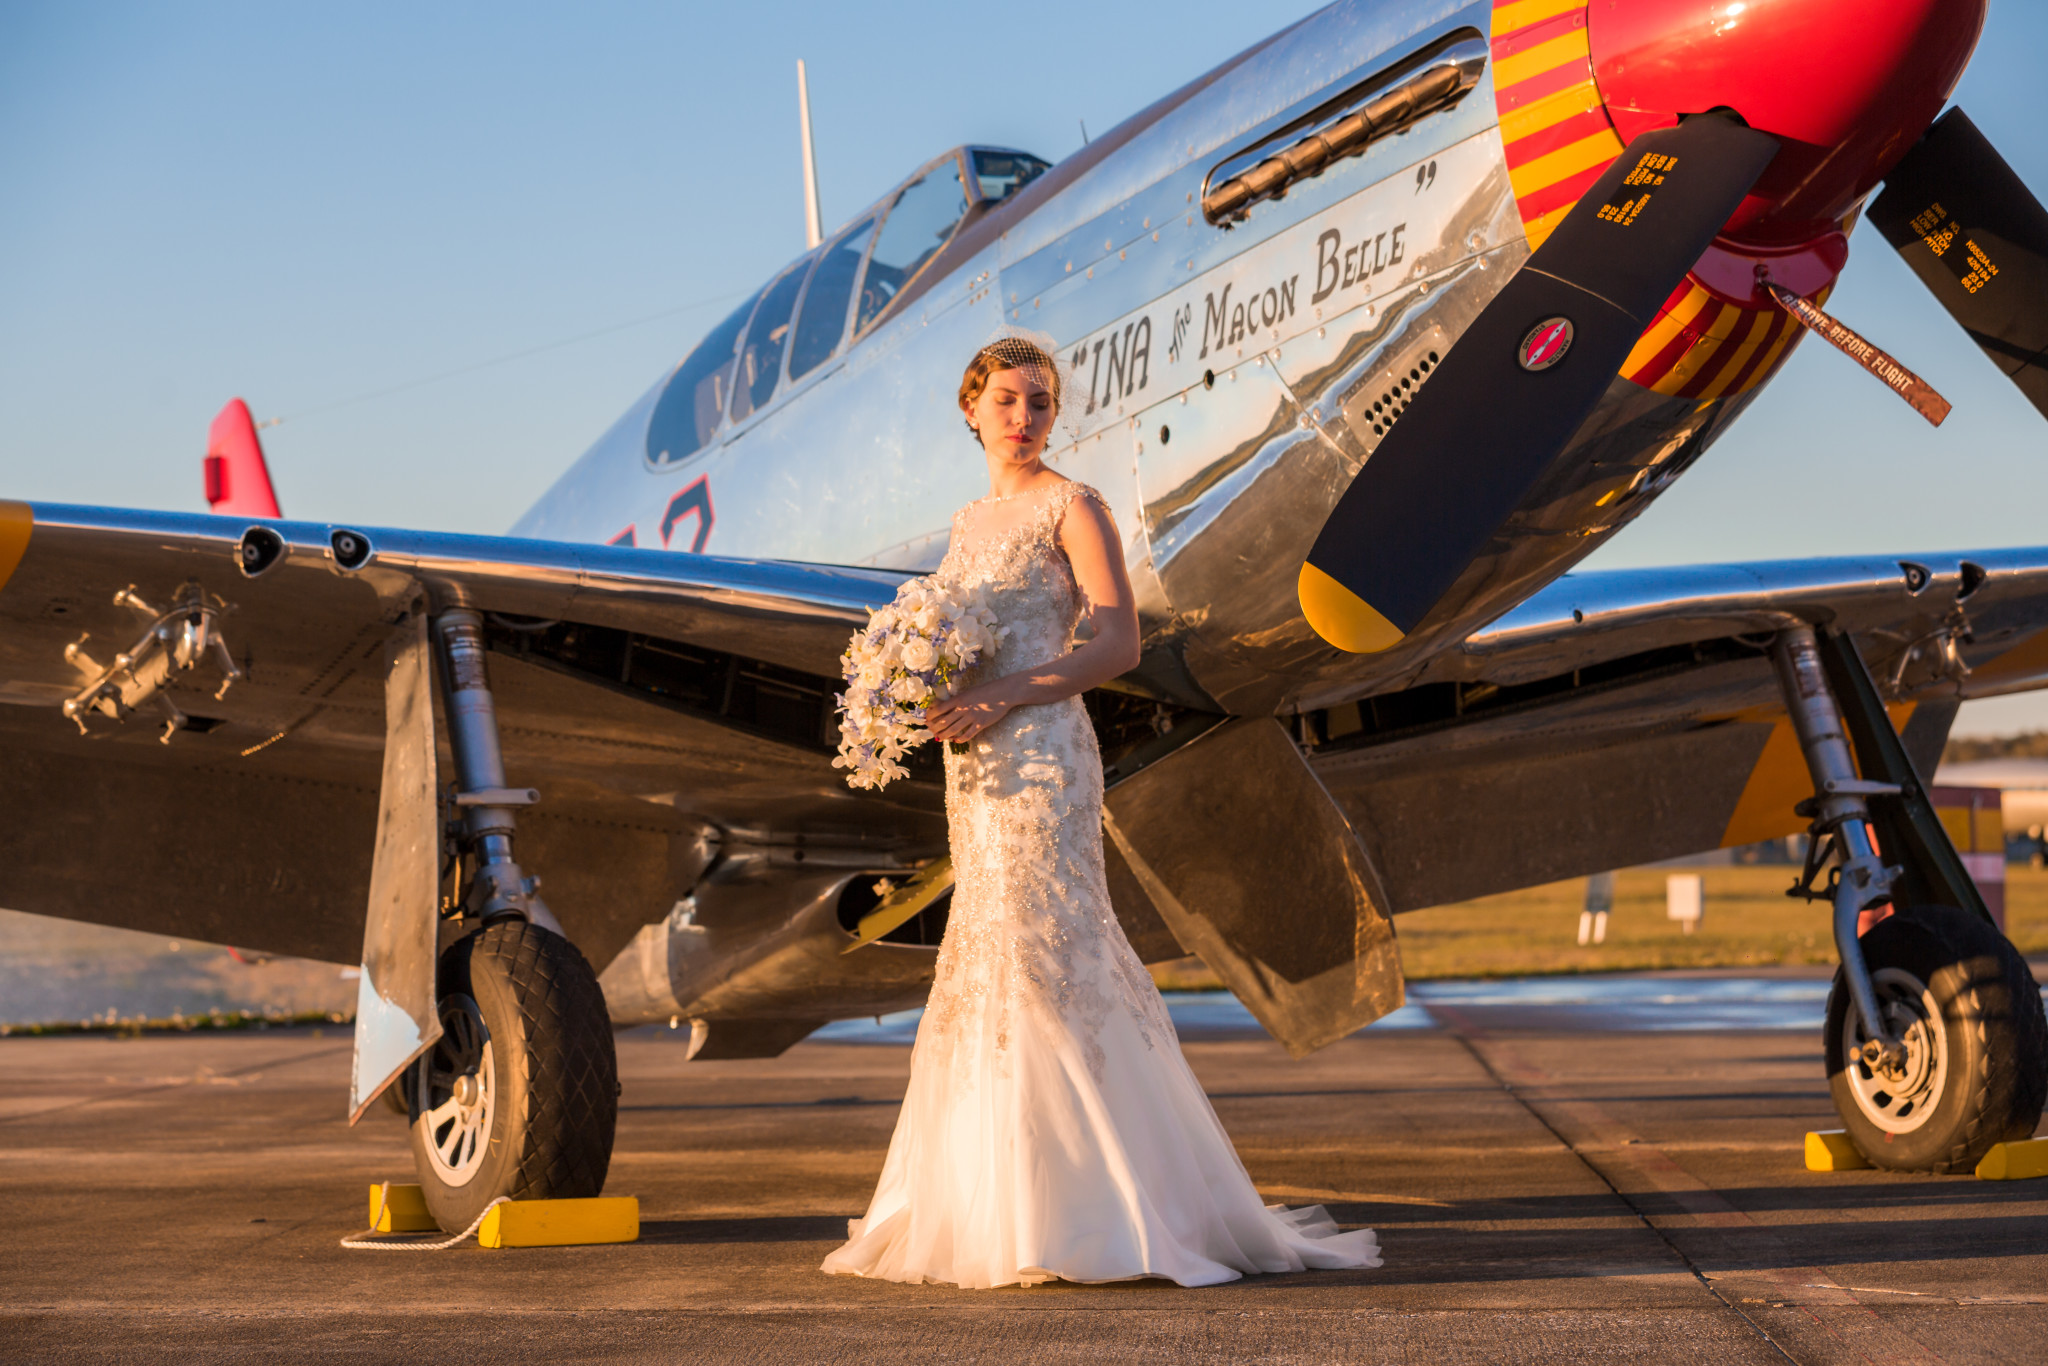 Bride in vintage wedding dress posing for pictures by WWII fighter plane